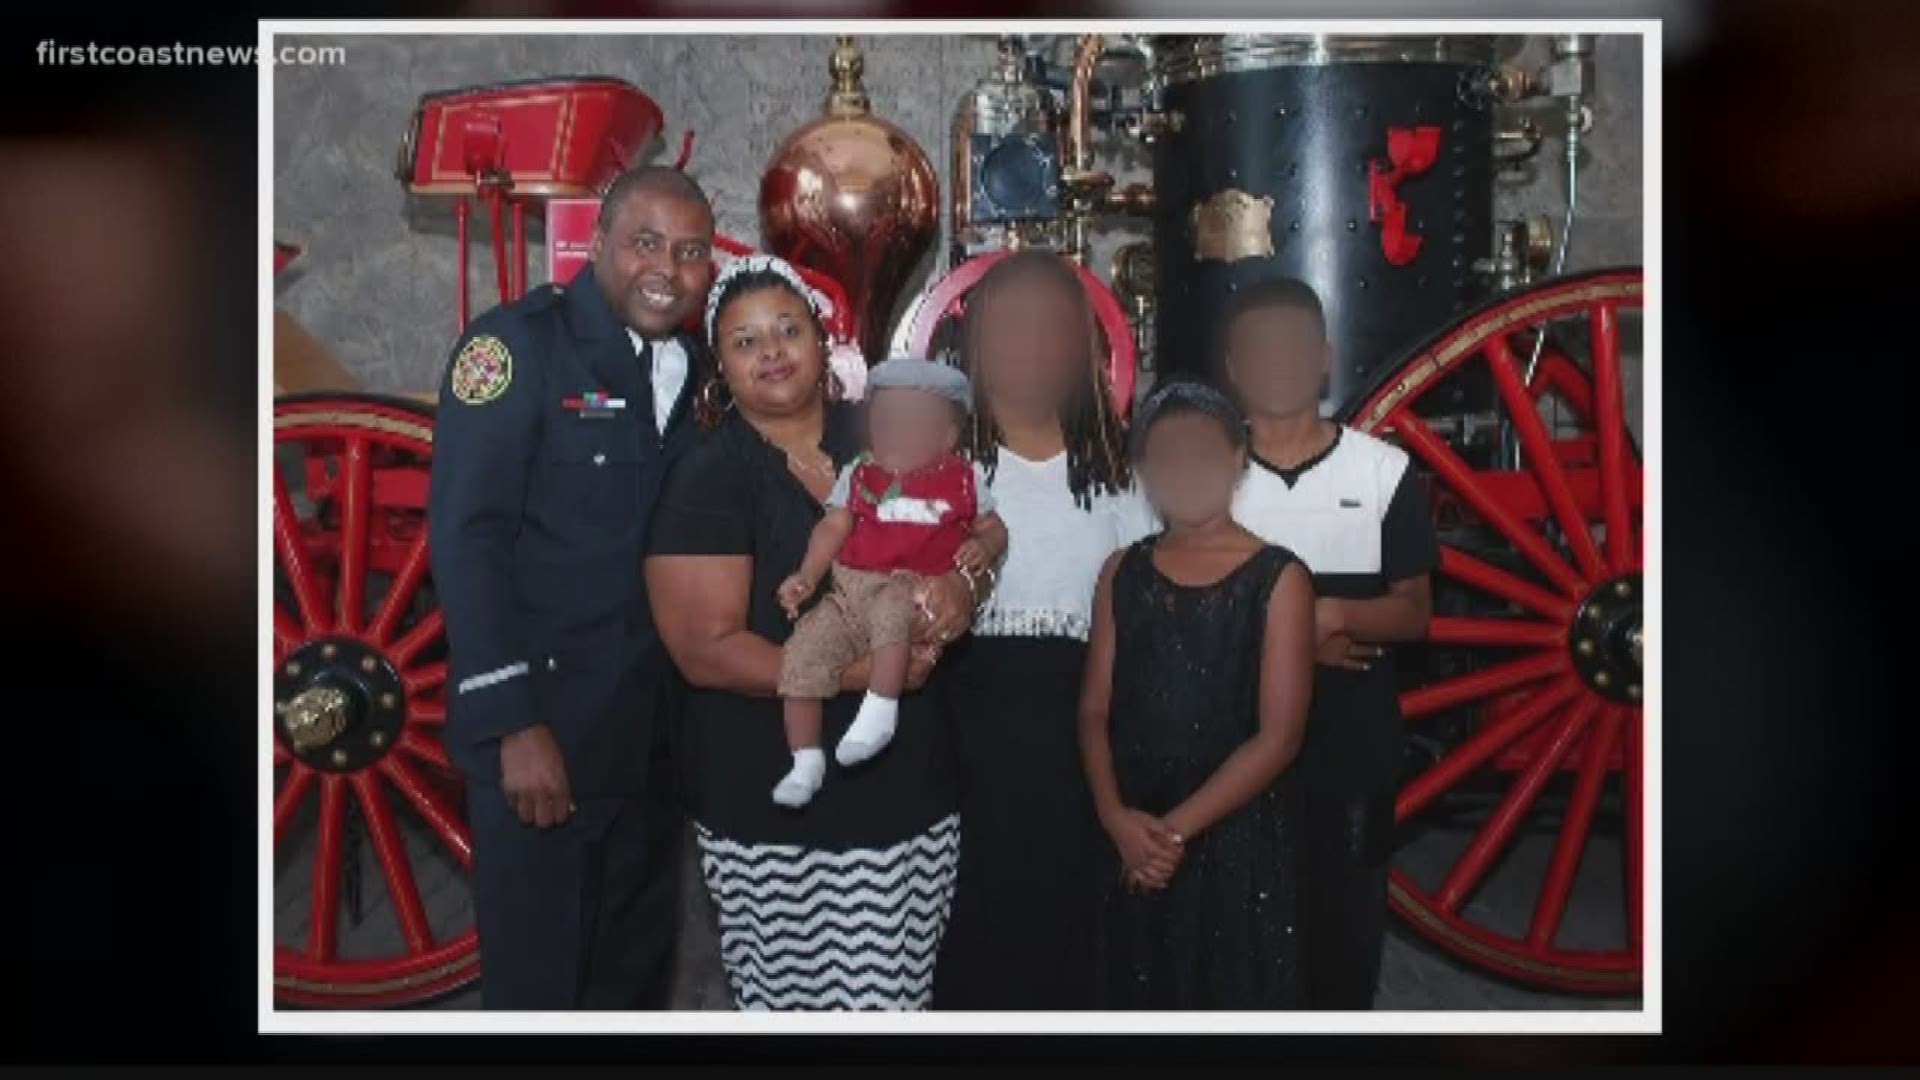 Last week, a JFRD firefighter lost his son after he fell into a retention pond and drowned. Now the organization is showing support for one of their own.